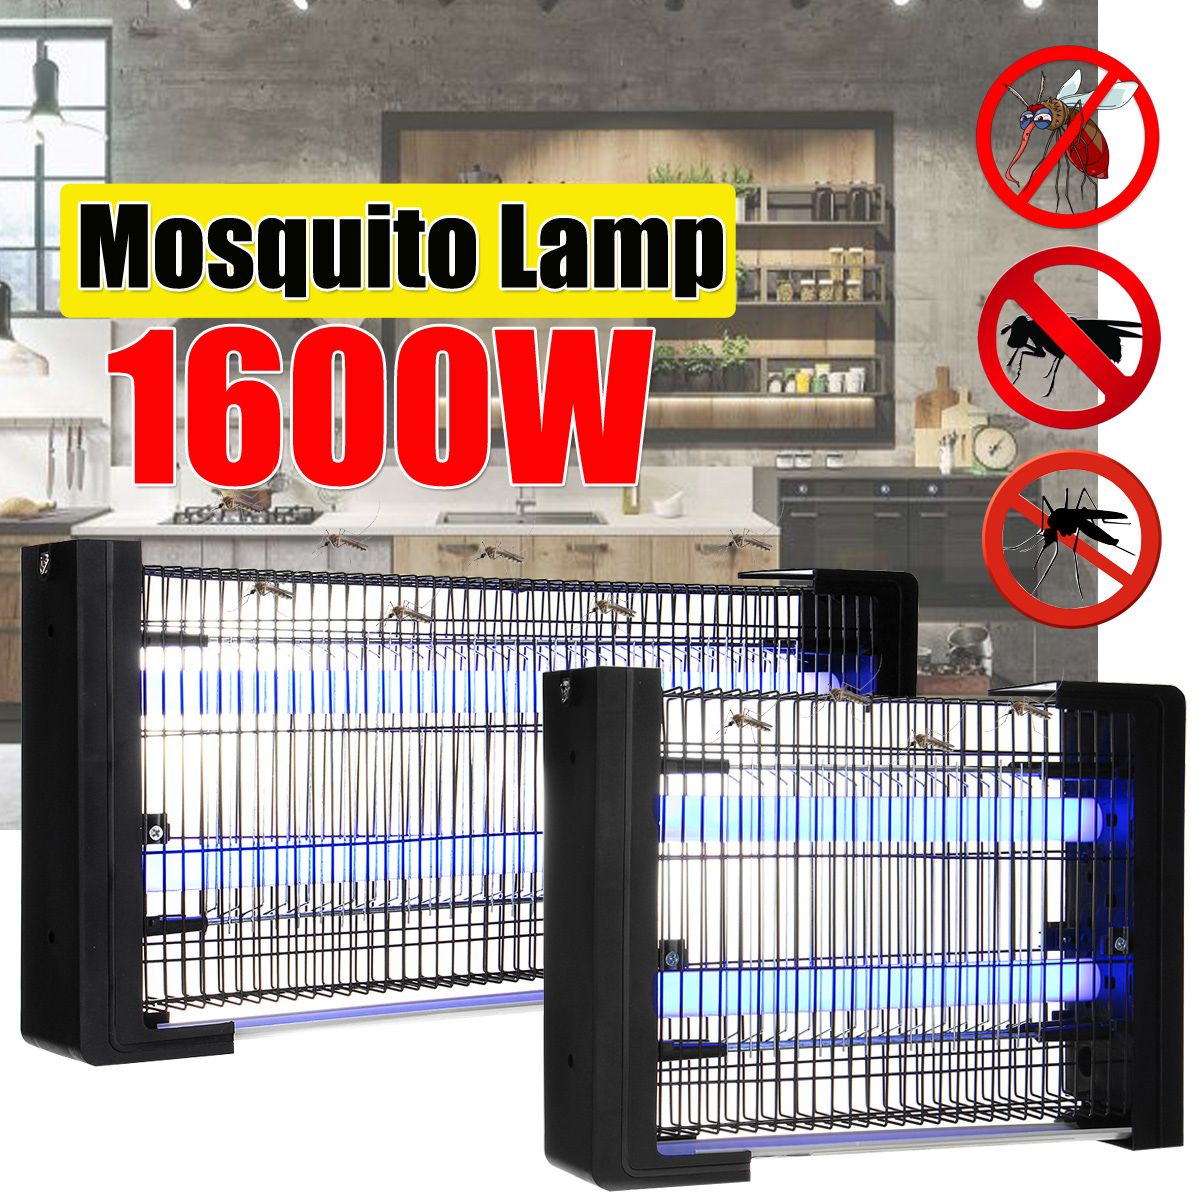 1600W-6W3W-Zapper-LED-Light-Bug-Mosquito-Fly-Insect-Killer-Bulb-Lamp-Pest-Control-1518603